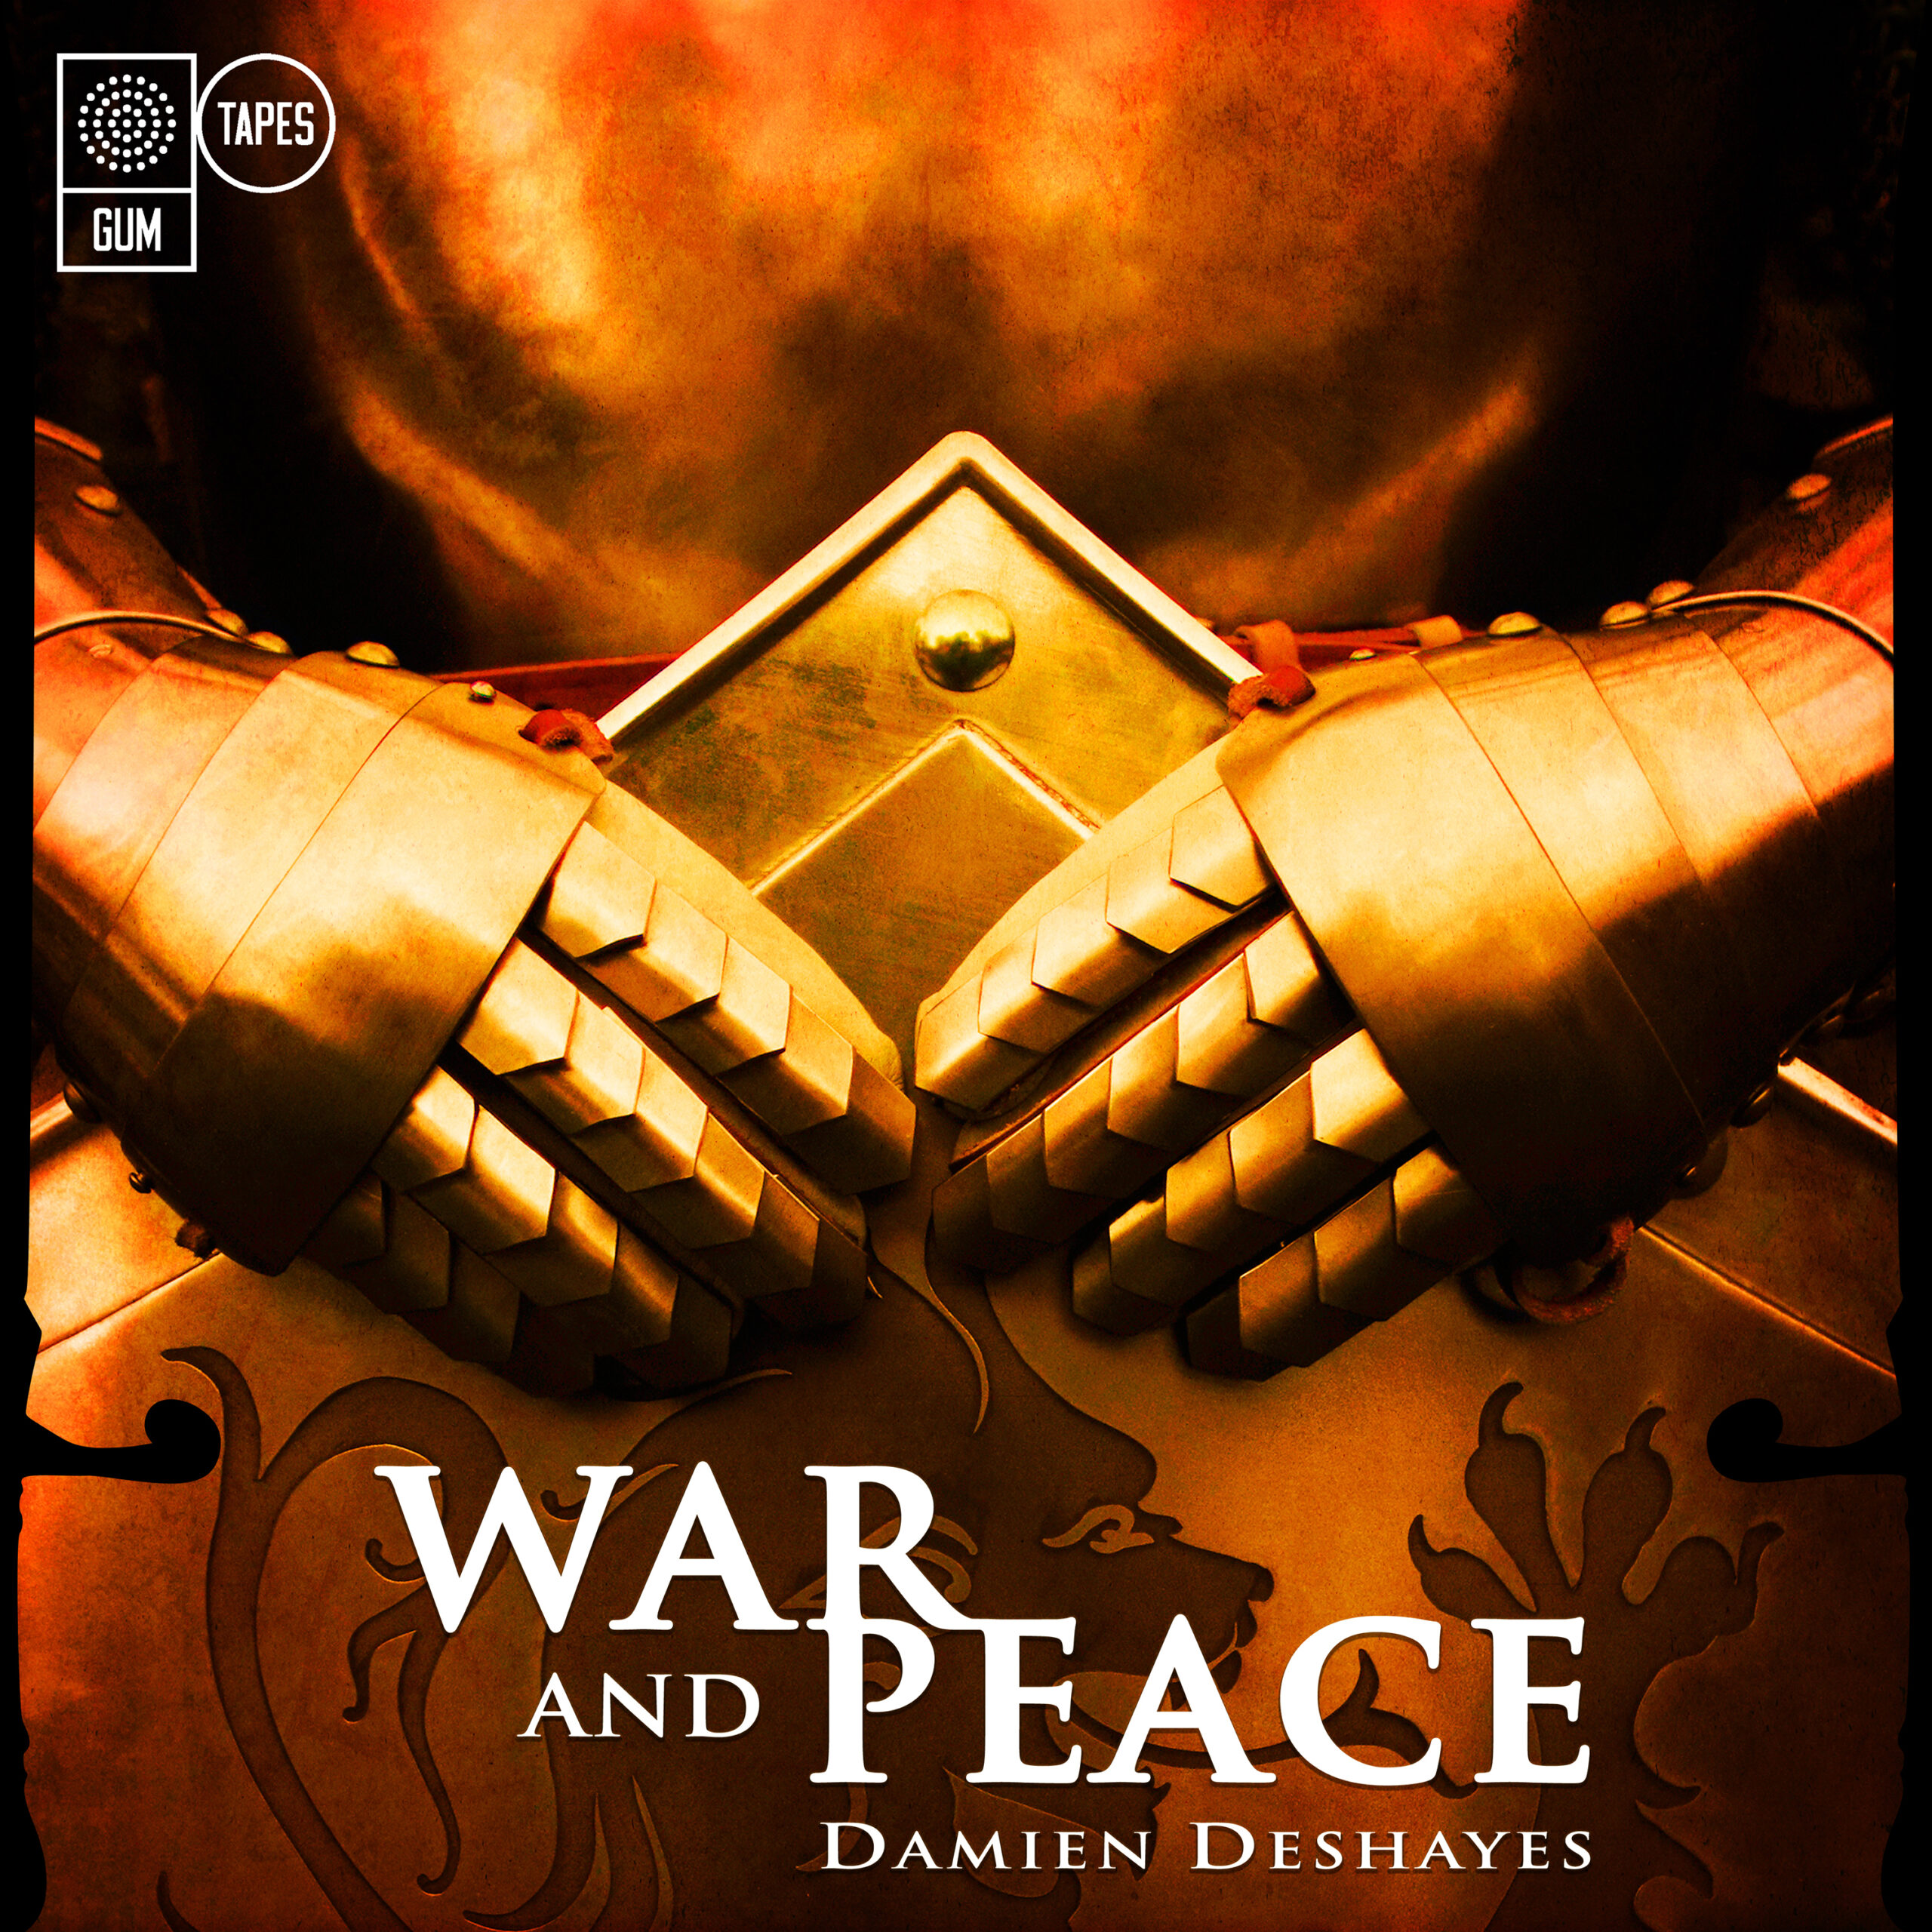 Damien Deshayes - War and Peace